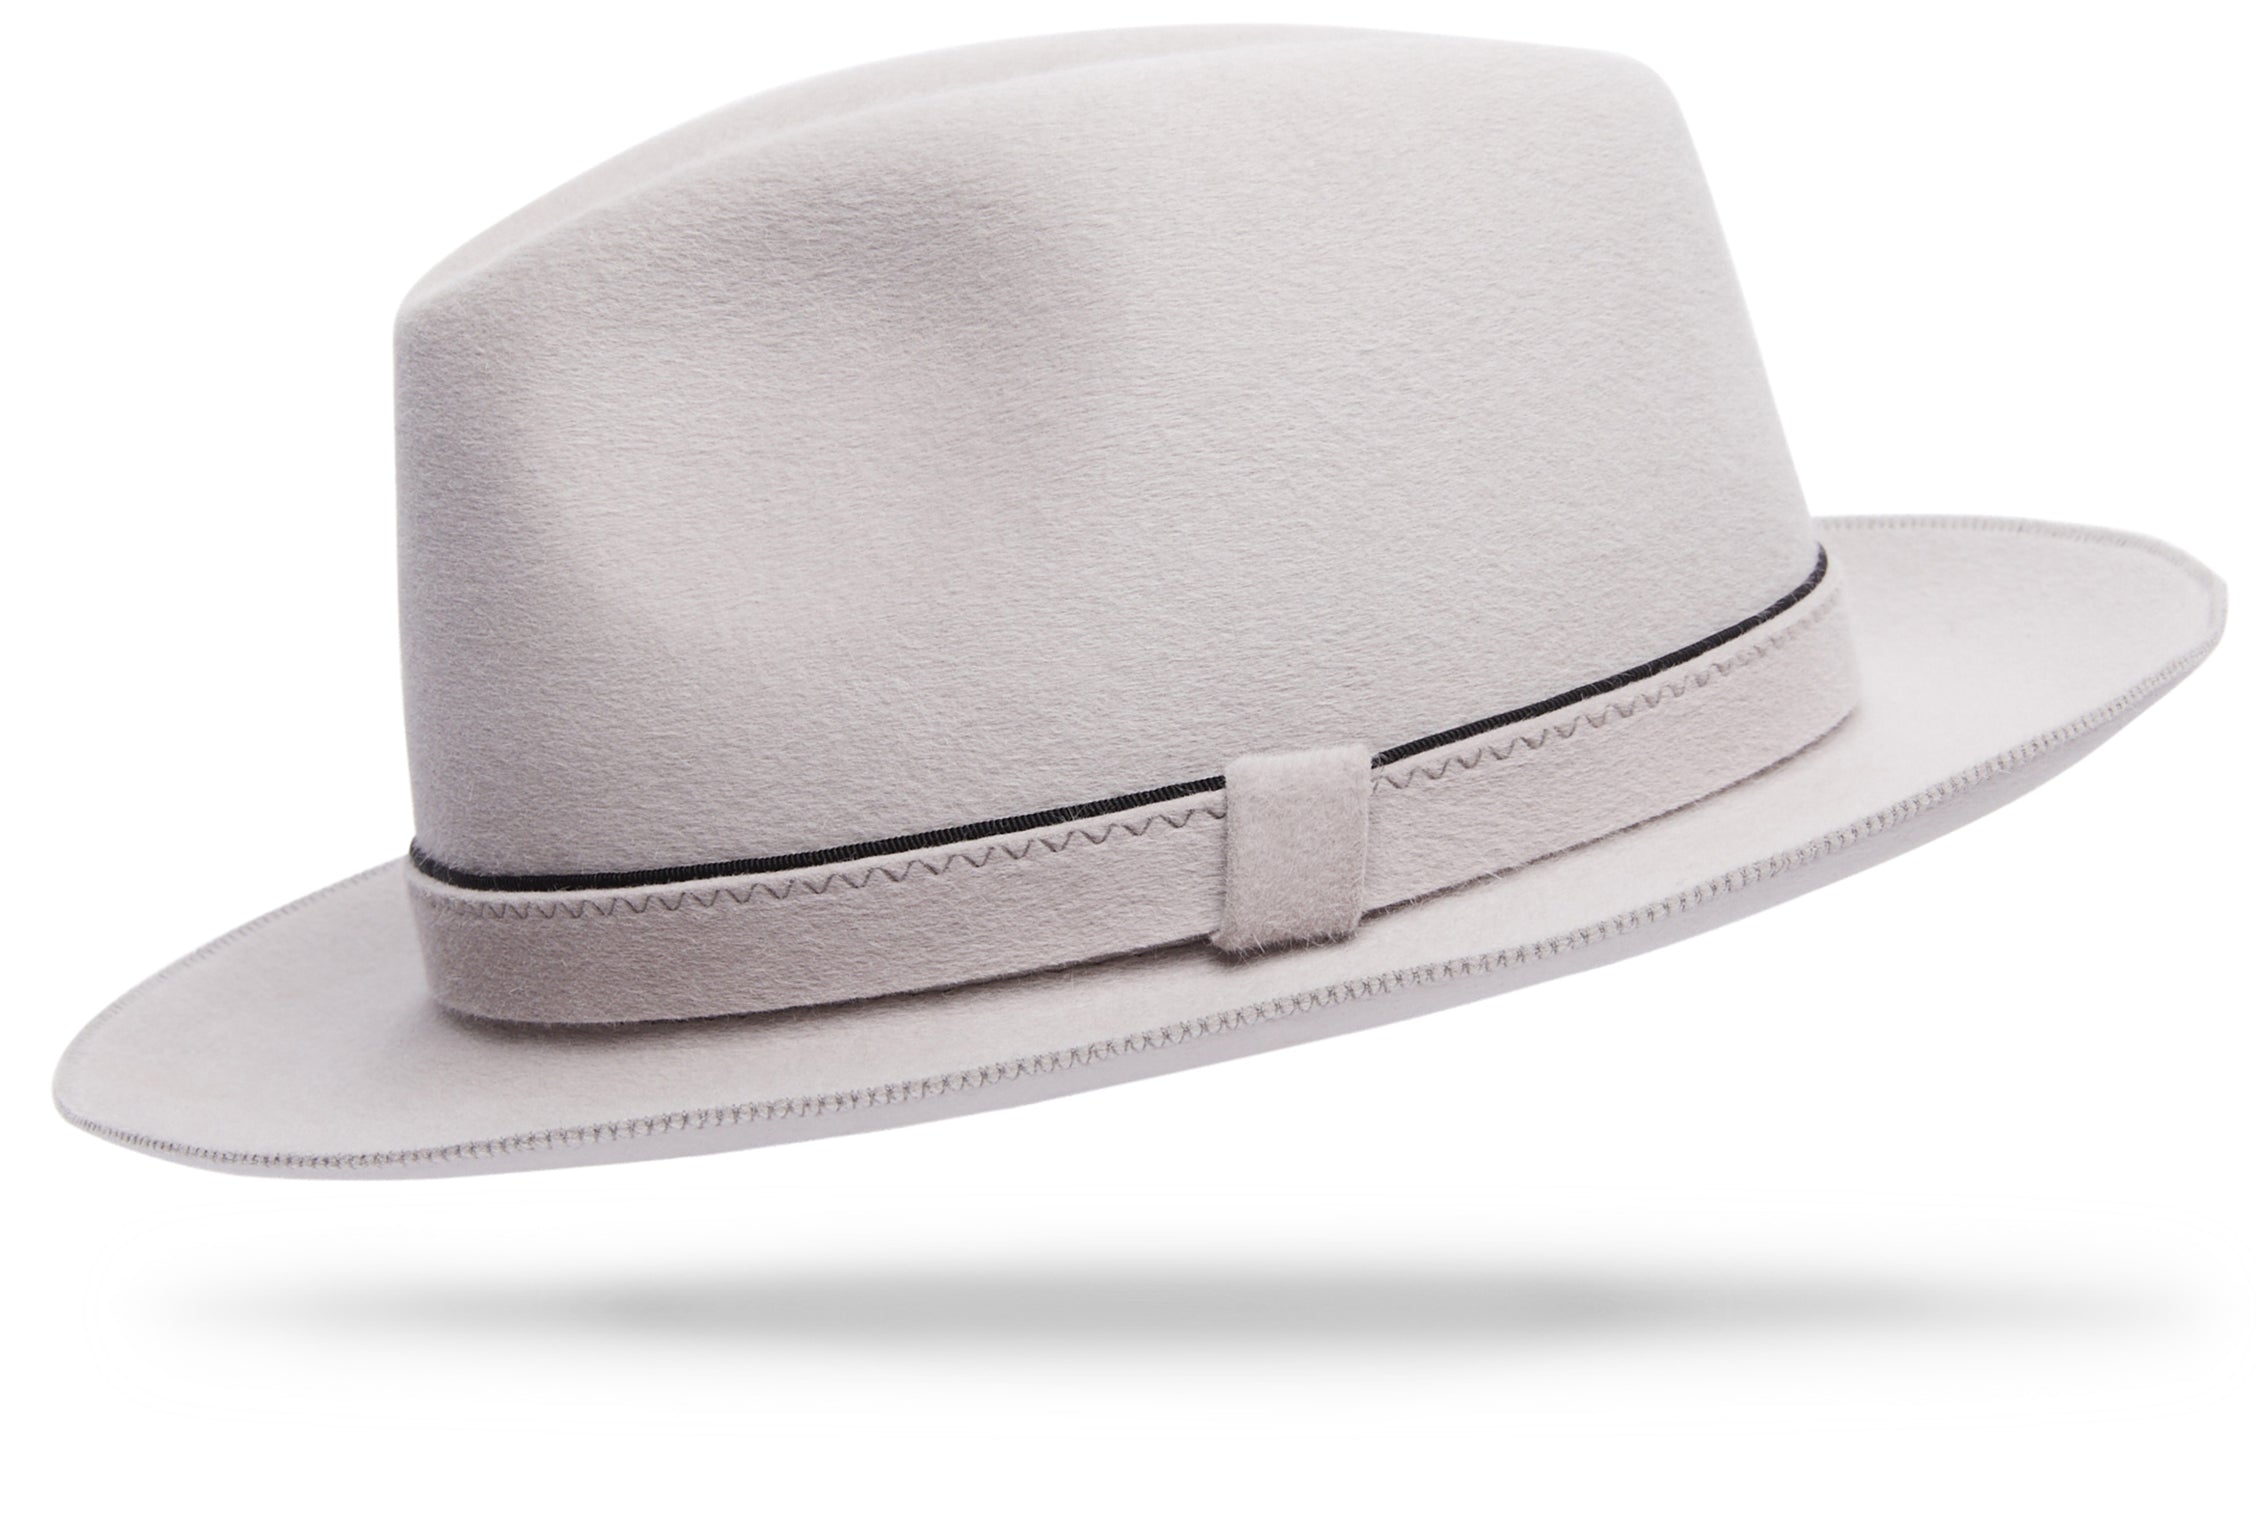 Design
Like a chip off an iceberg in Greenland... A white italian cashmere hat with pink overtones and cool blue undertones... Made of 100% lustrous cashmere, the Firenze fully embodies luxury chic.
Material
100% Italian cashmere
Specifications
The felt-on-felt hatband with its contrast complimentary edging takes detail oriented to the next level while the 2 3/8” brim and moderate crown effortlessly exude quality. Handmade in our atelier in NYC .